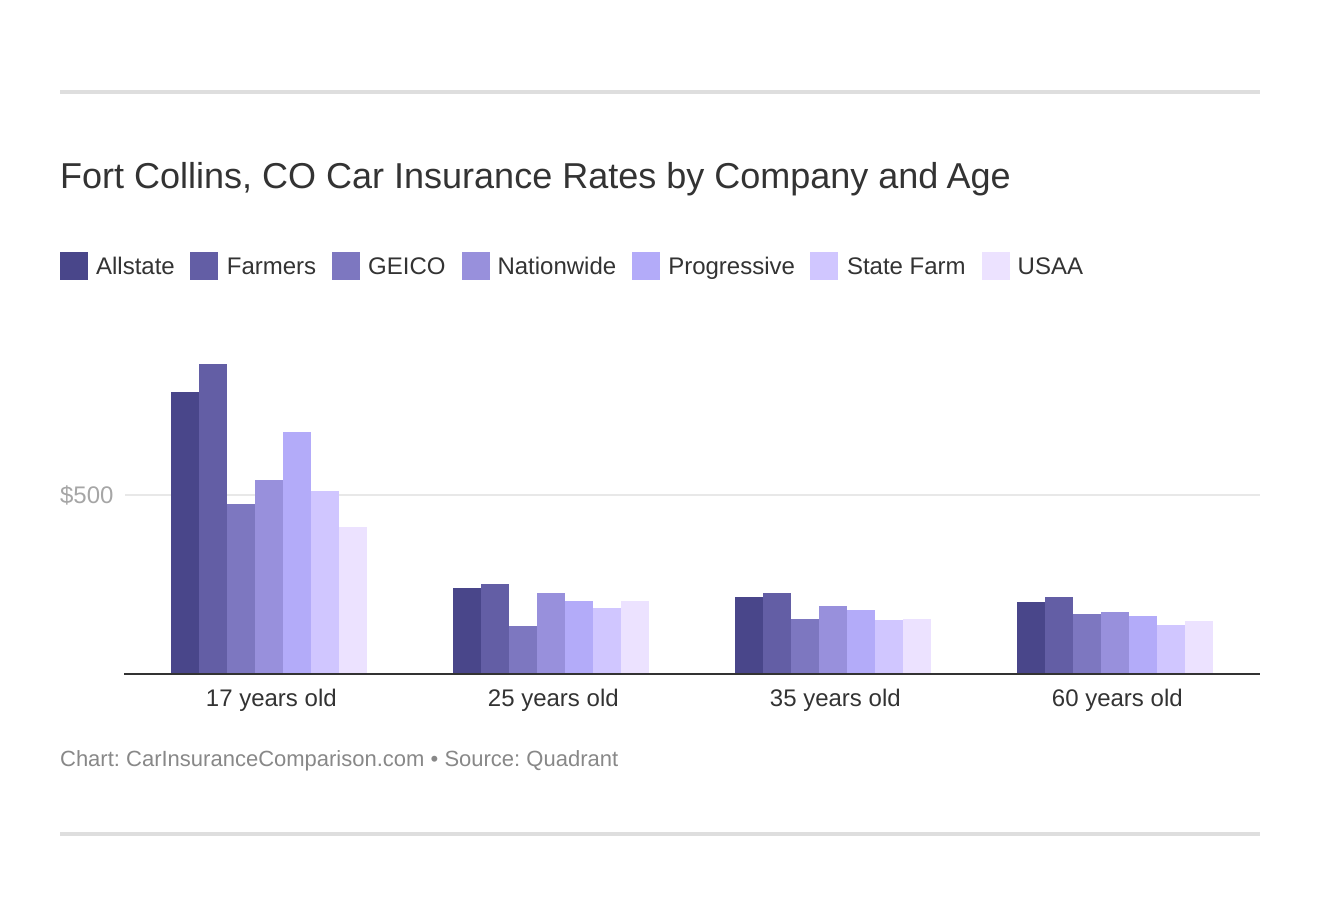 Fort Collins, CO Car Insurance Rates by Company and Age